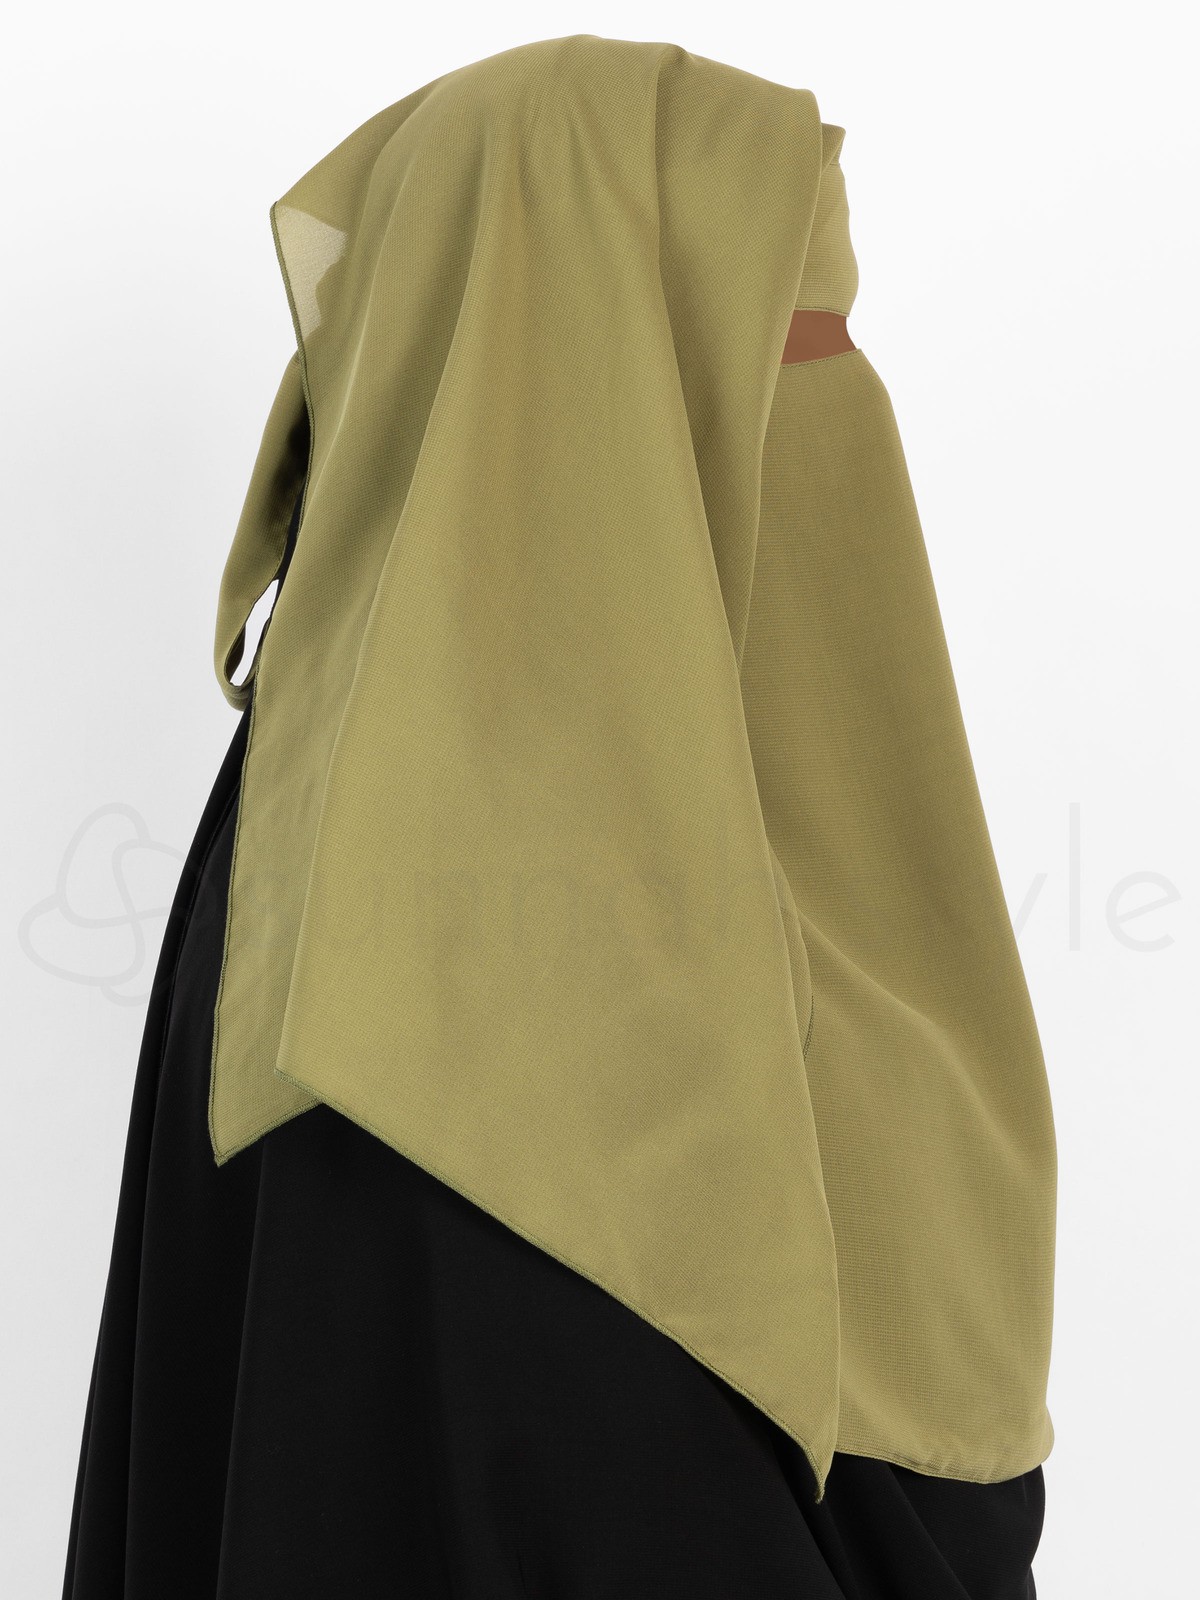 Sunnah Style - No-Pinch Two Layer Niqab (Moss)